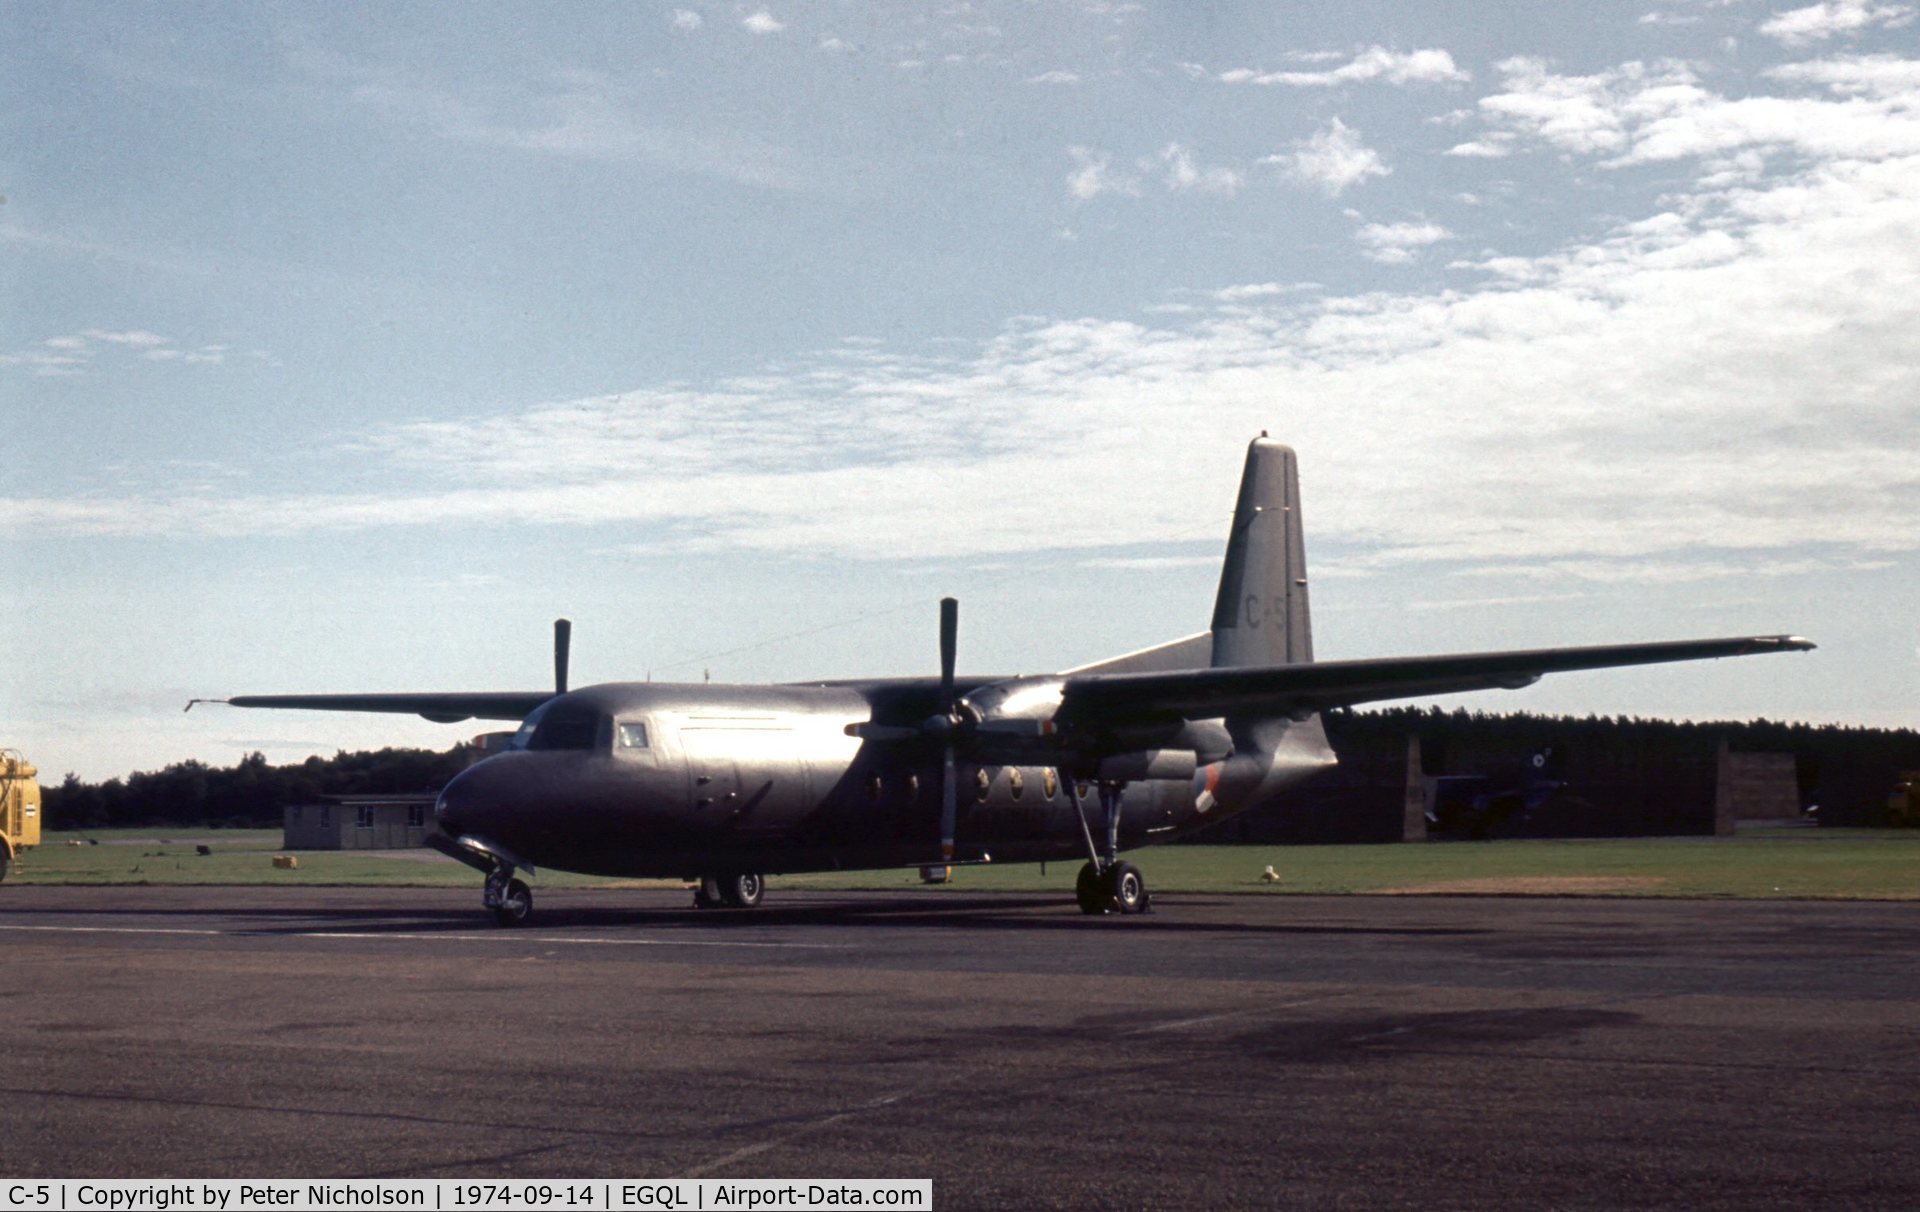 C-5, 1960 Fokker F-27-300M Troopship C/N 10155, F-27-300M Troopship of 334 Squadron Royal Netherlands Air Force at the 1974 RAF Leuchars Airshow.